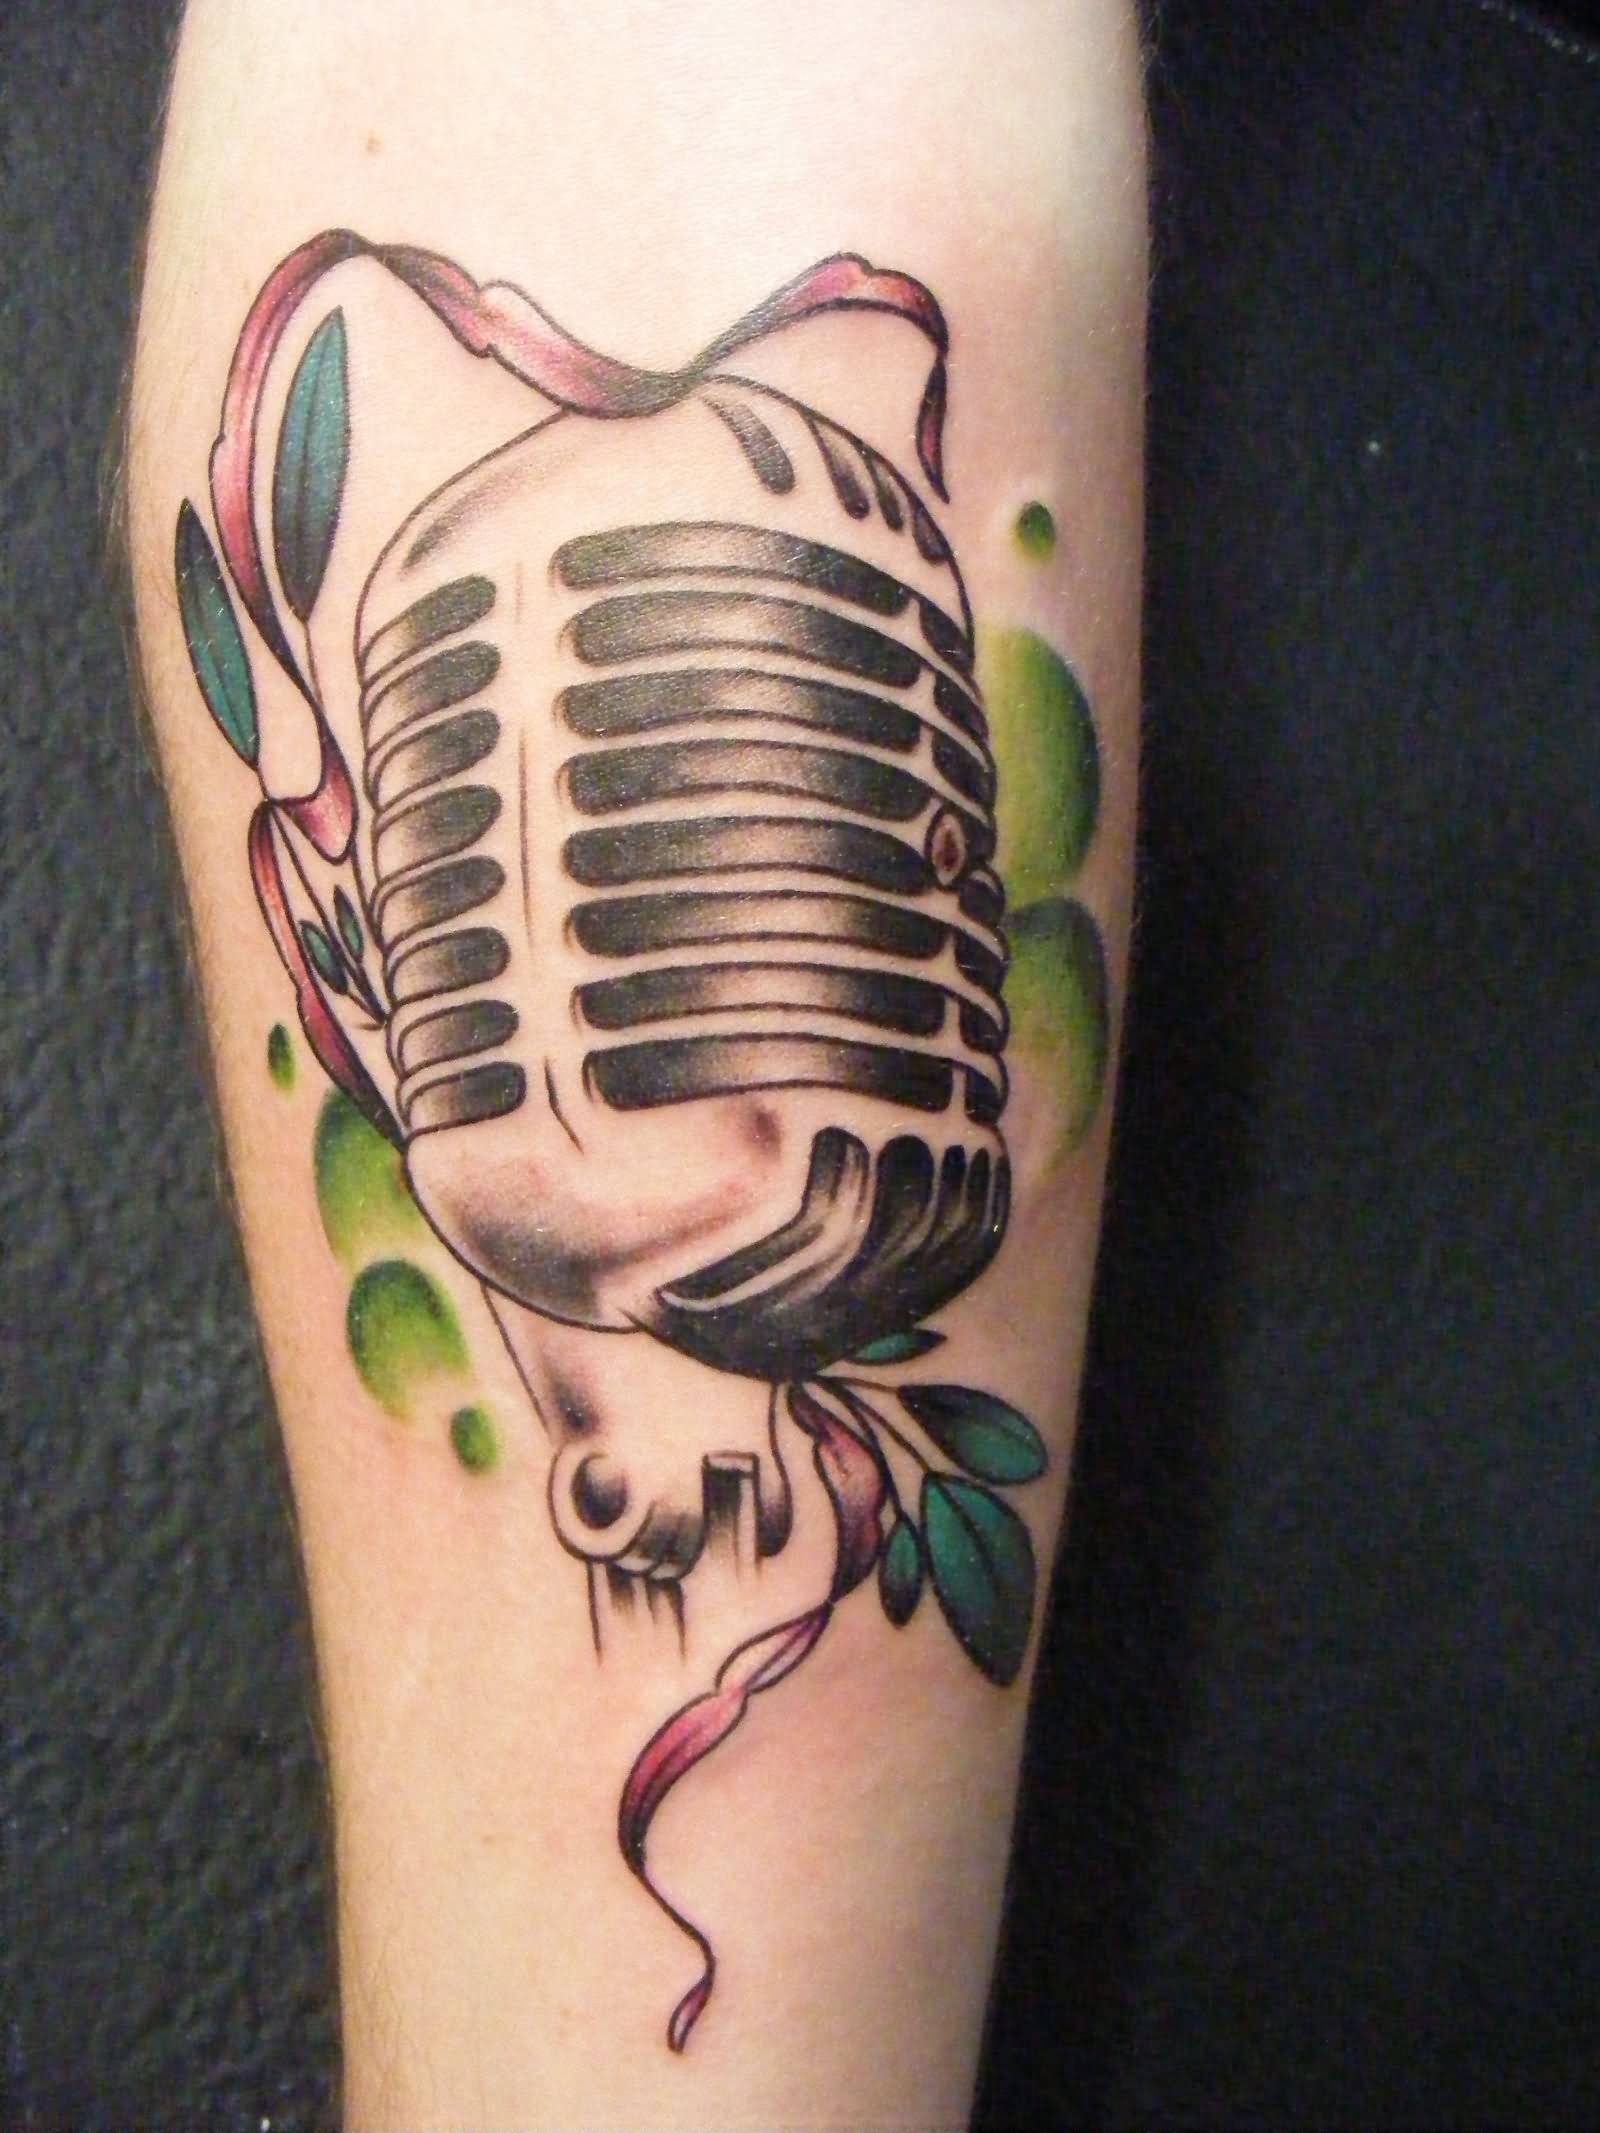 Red Ribbon And Microphone Tattoo On Leg